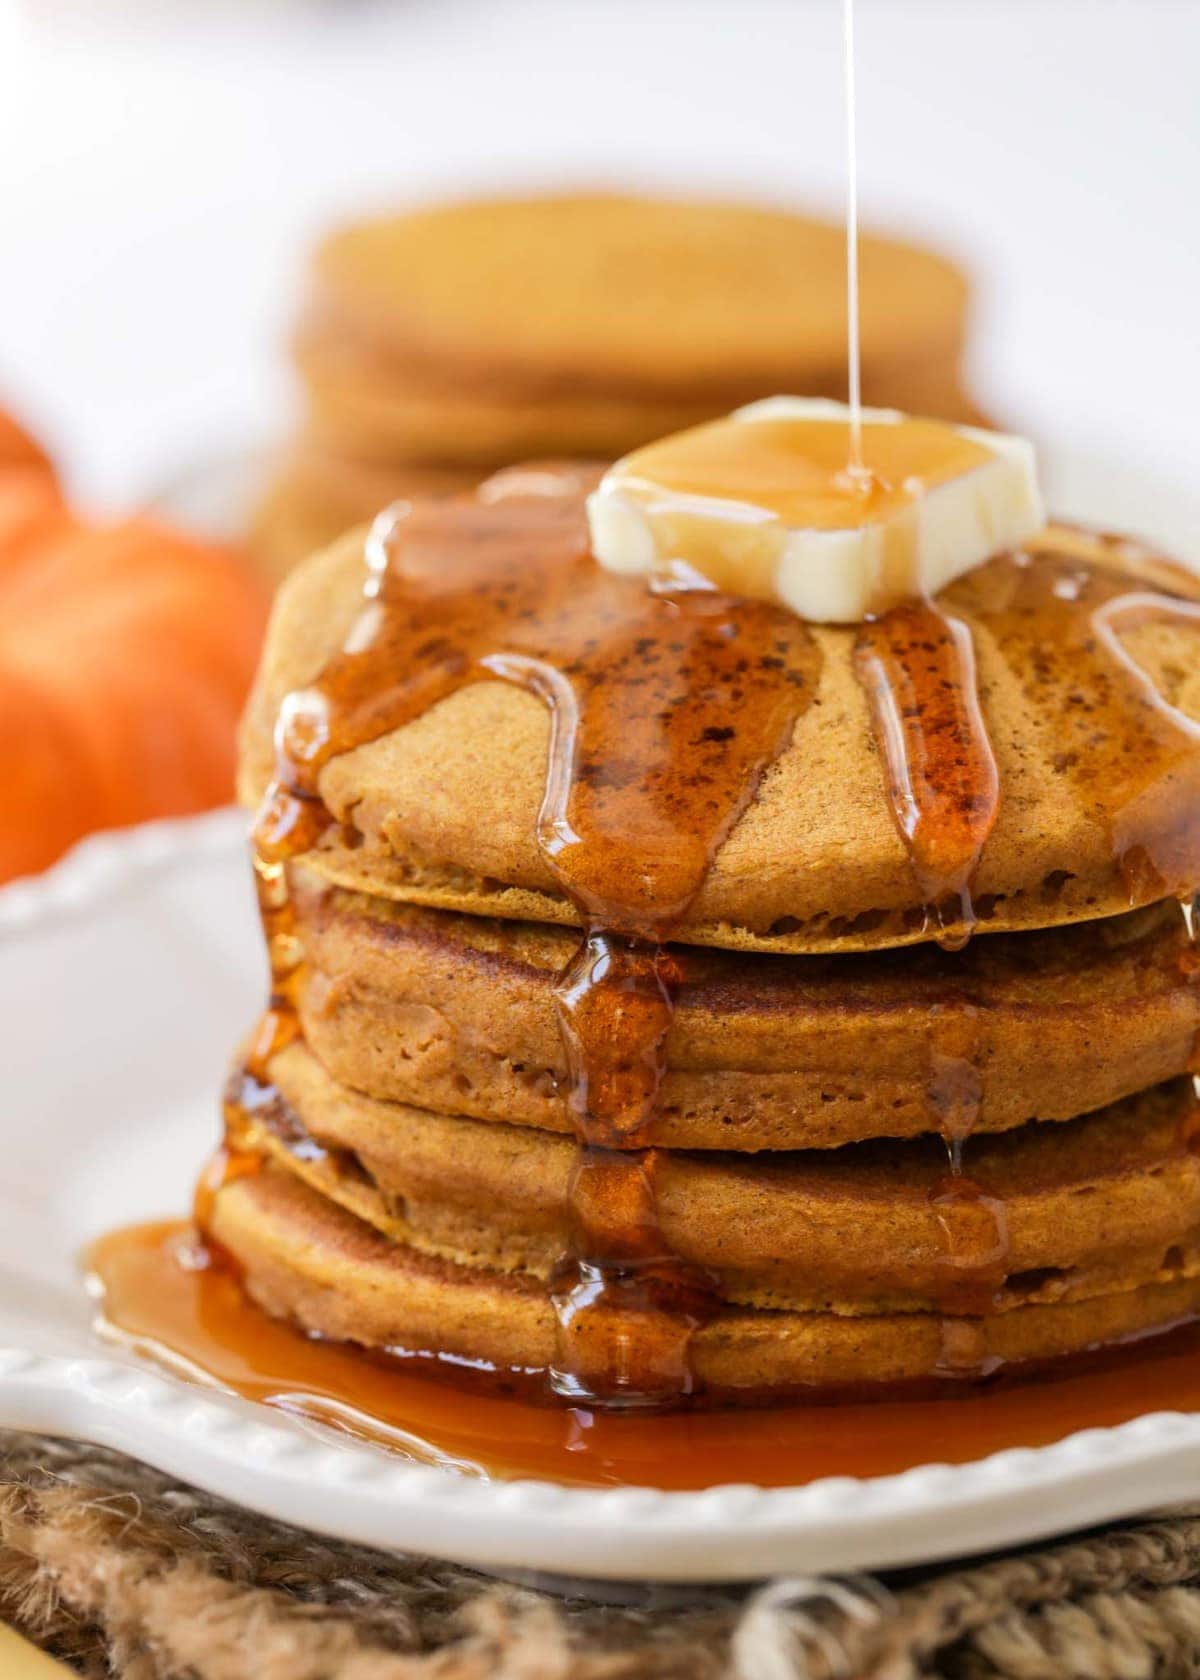 Easy pancake recipe - Pumpkin pancakes stacked with syrup on them.